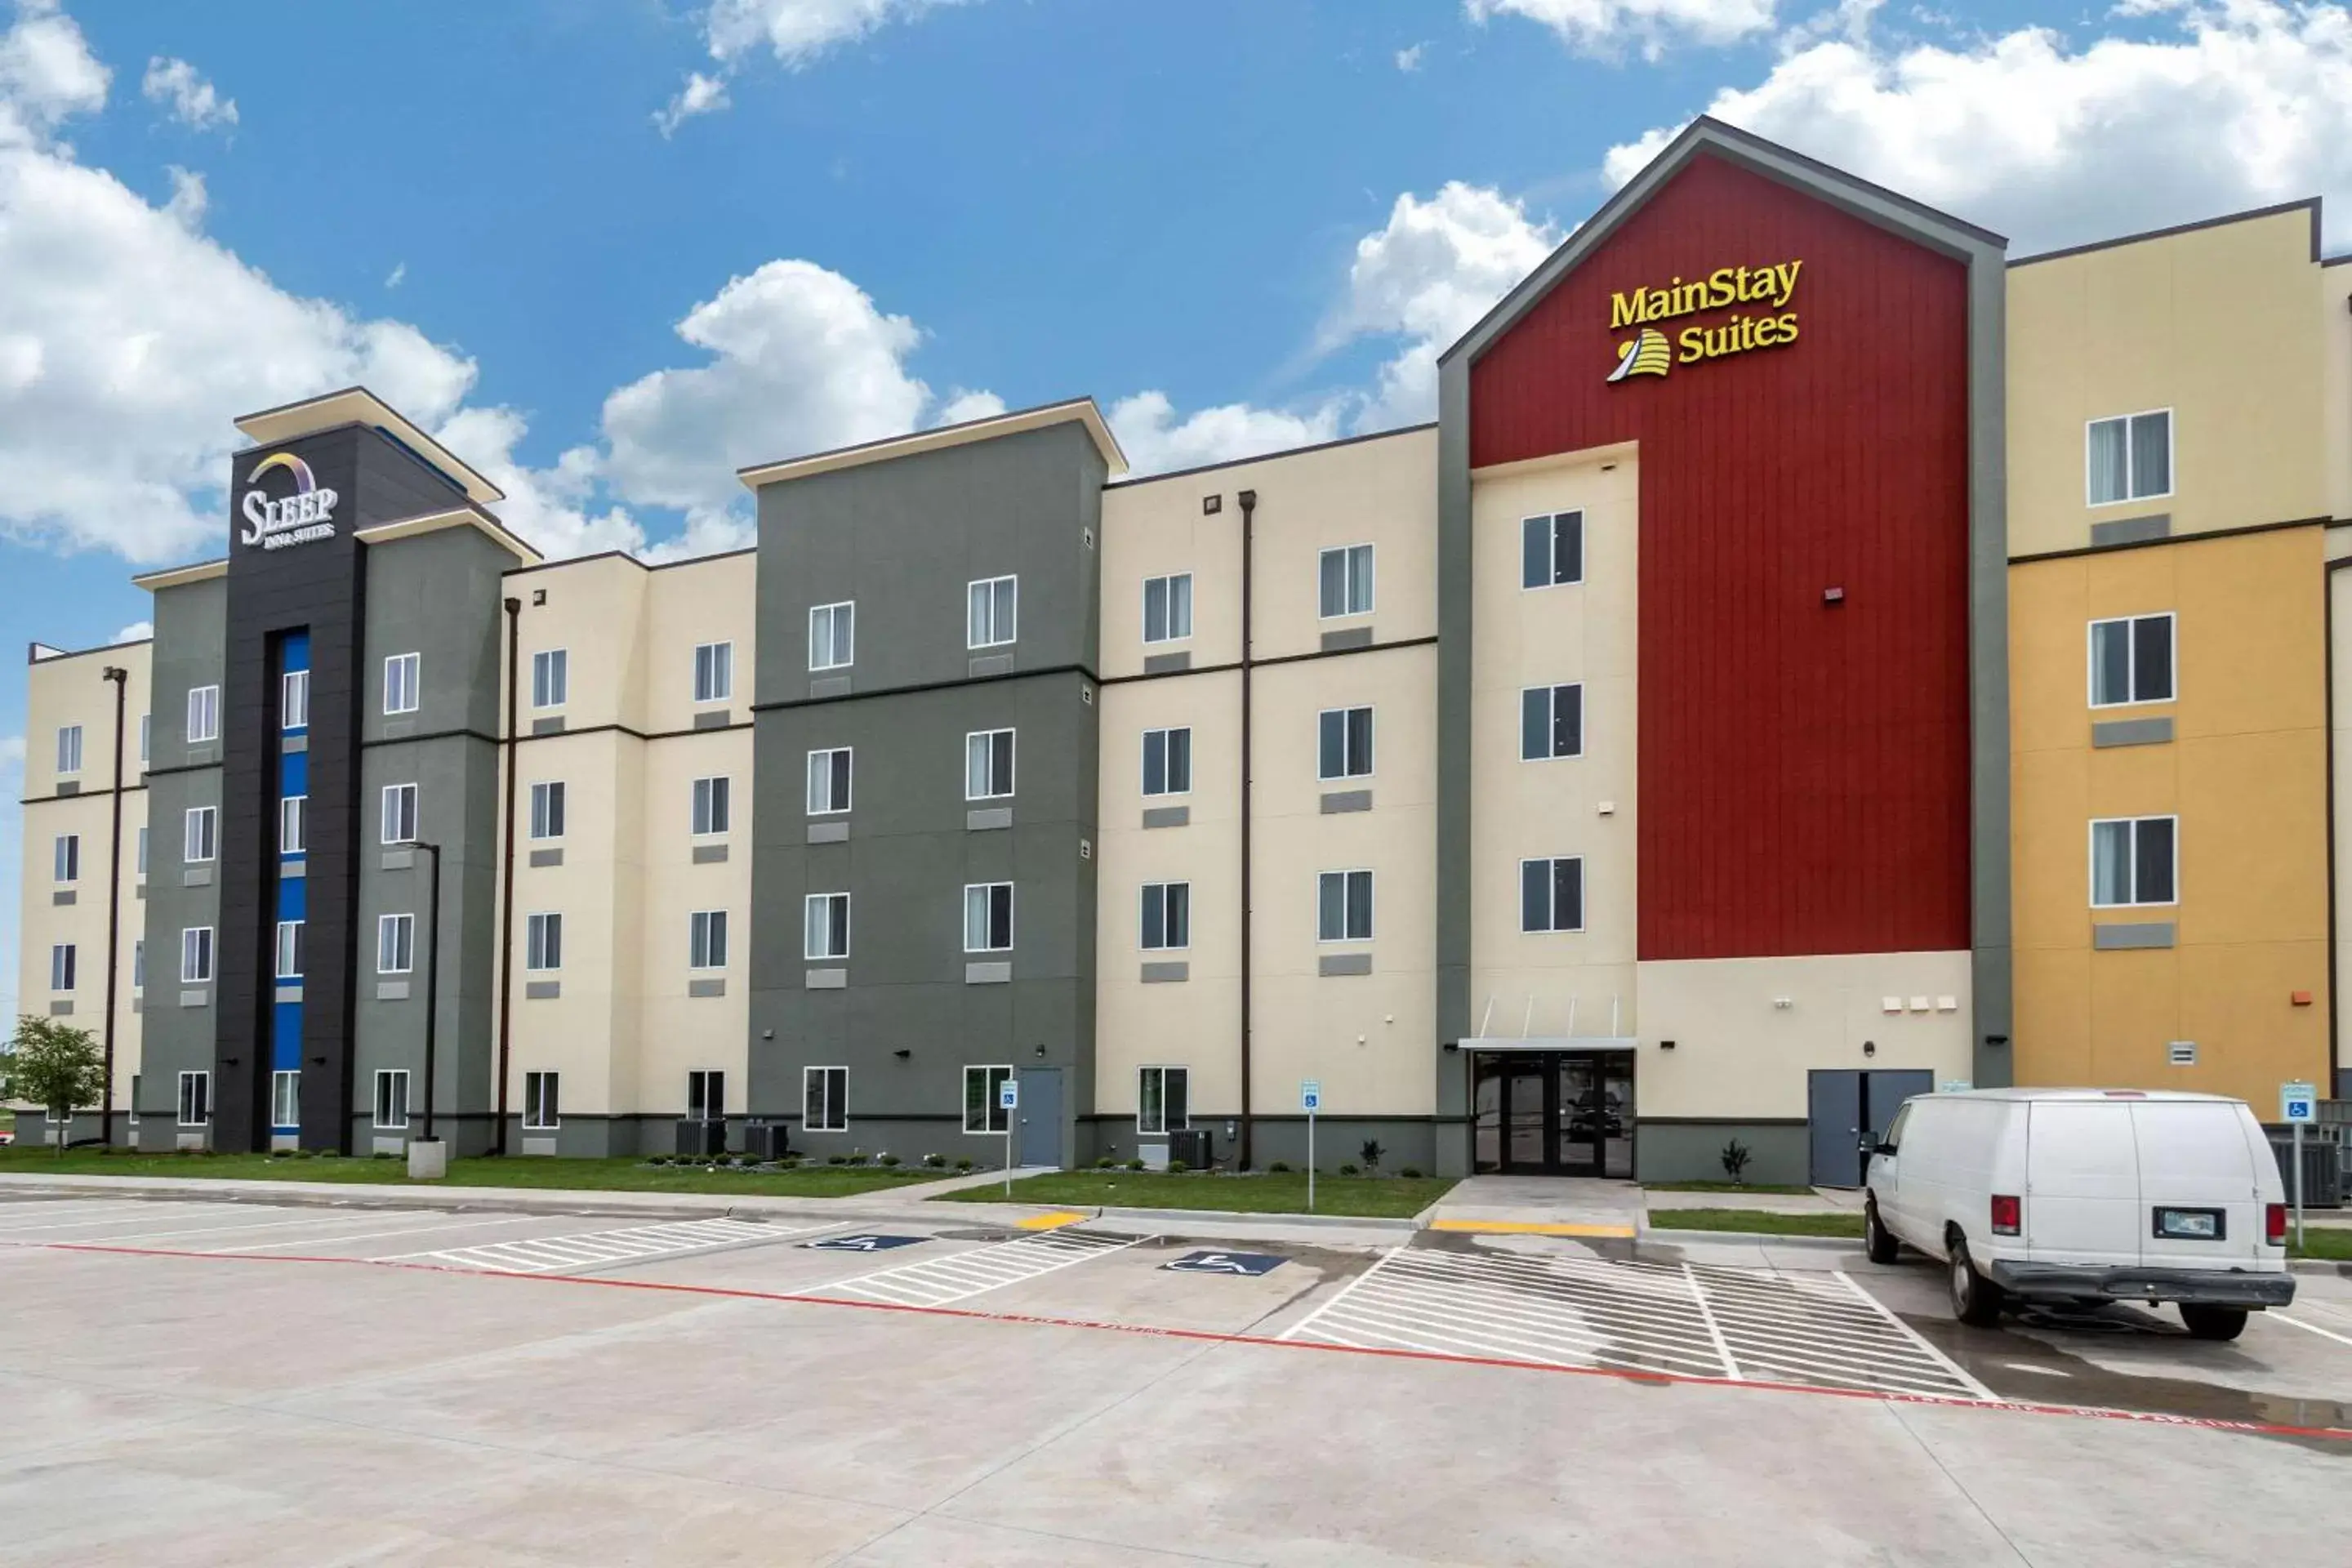 Property building in MainStay Suites Bricktown - near Medical Center